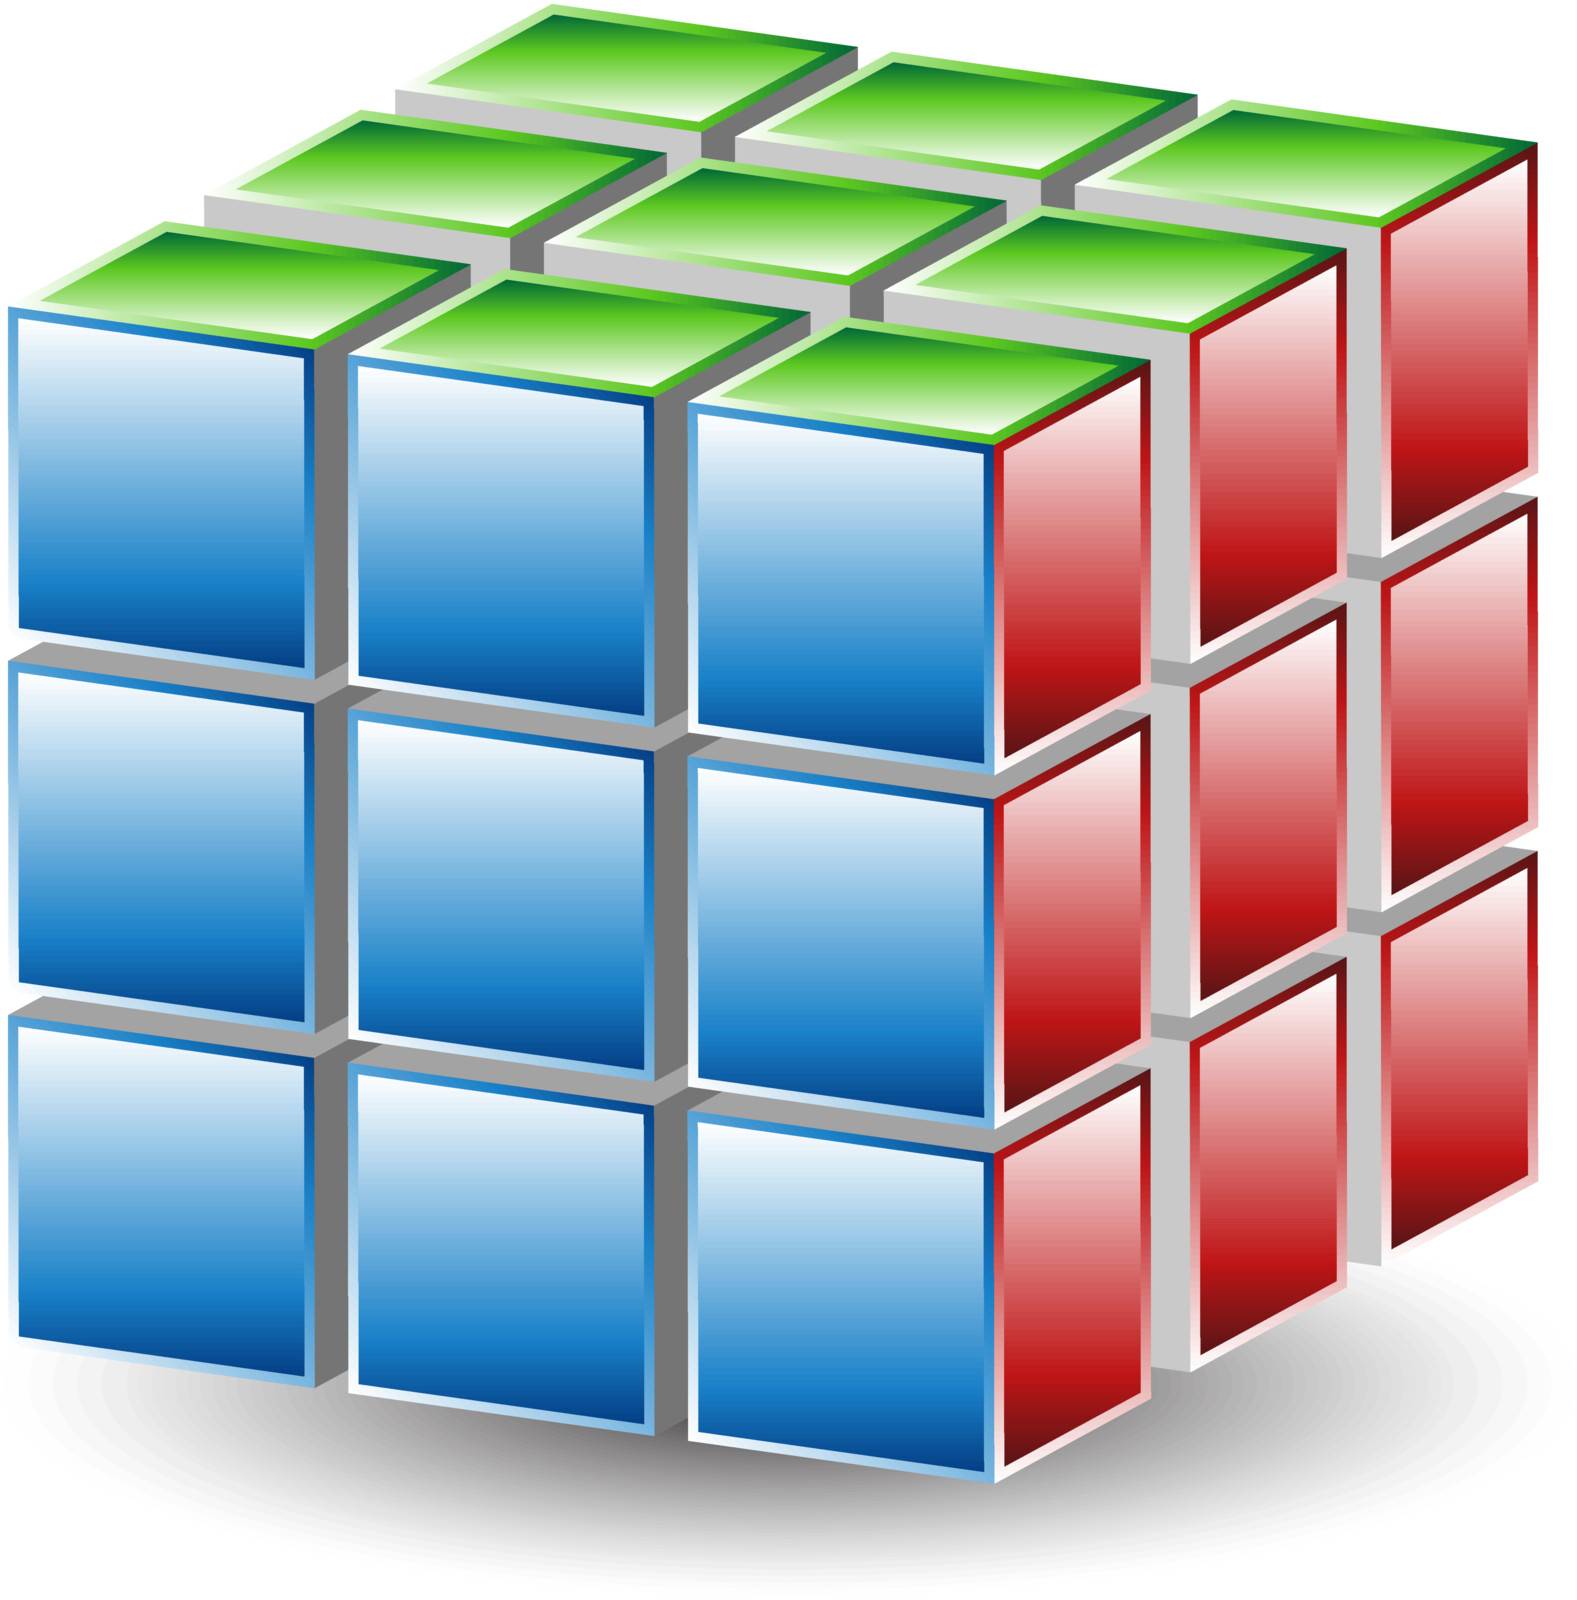 An image of a Puzzle Cube.